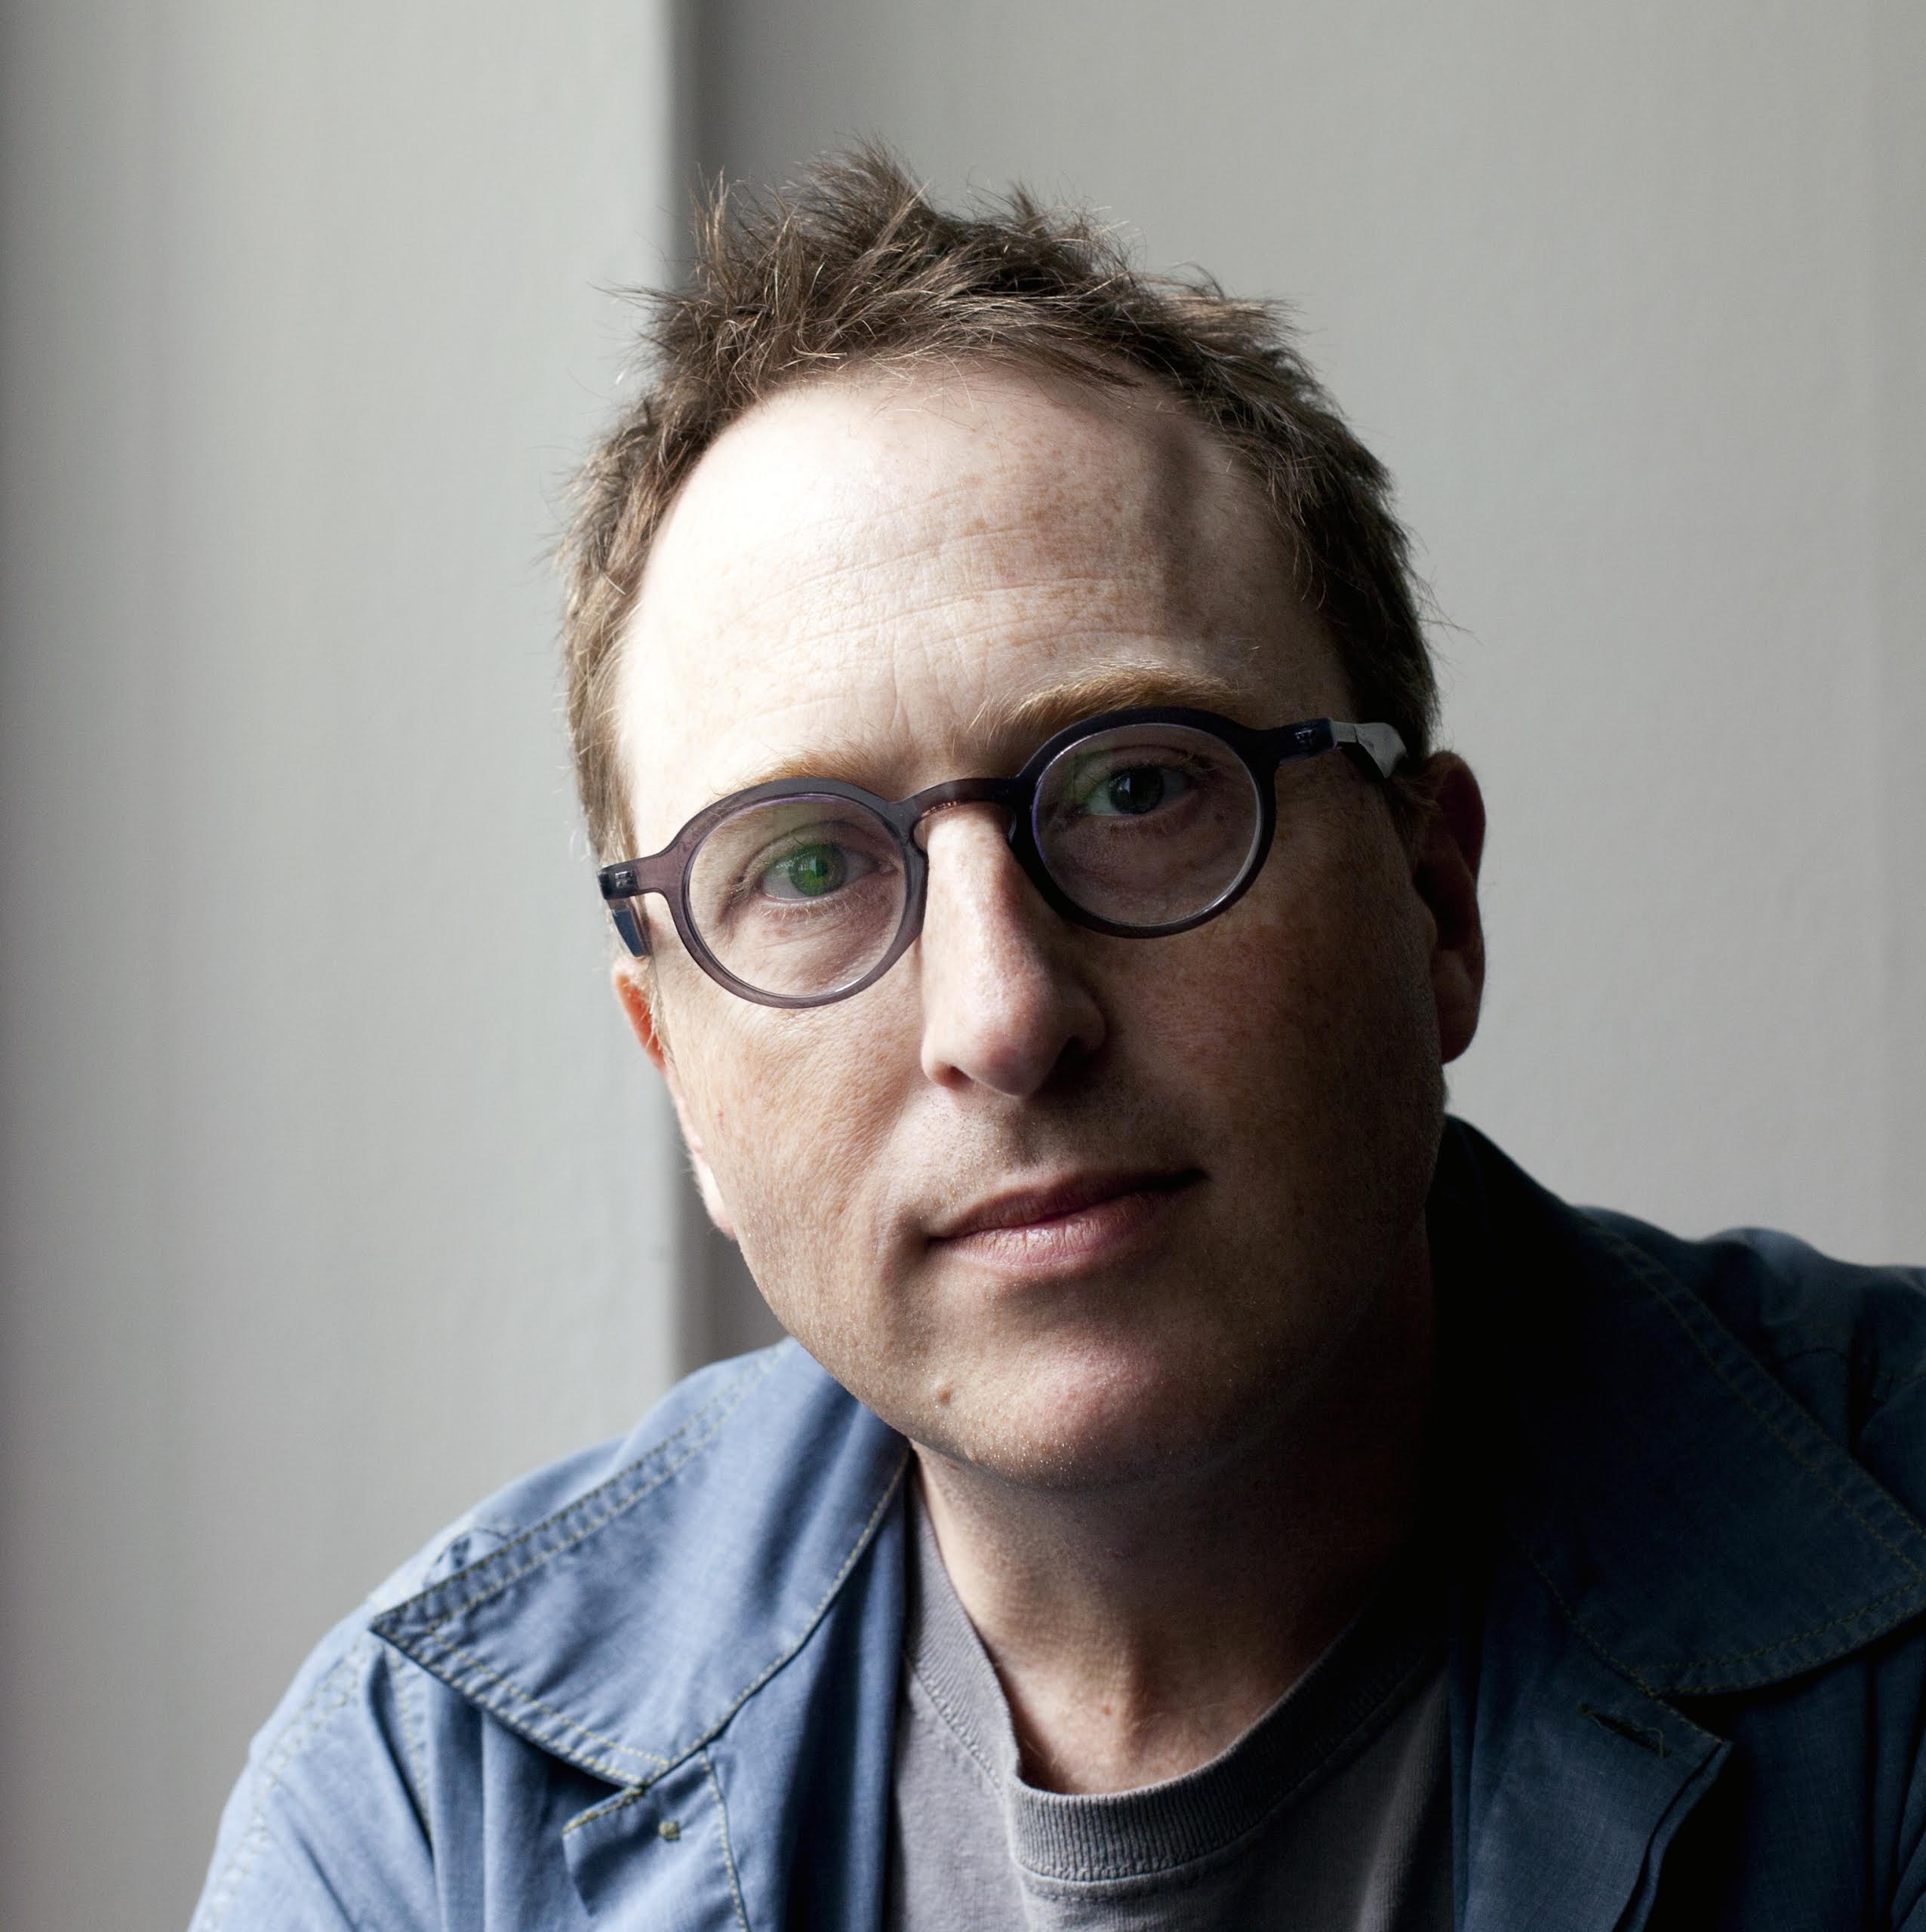 Should Children Be Paid To Learn? | An Interview with Jon Ronson